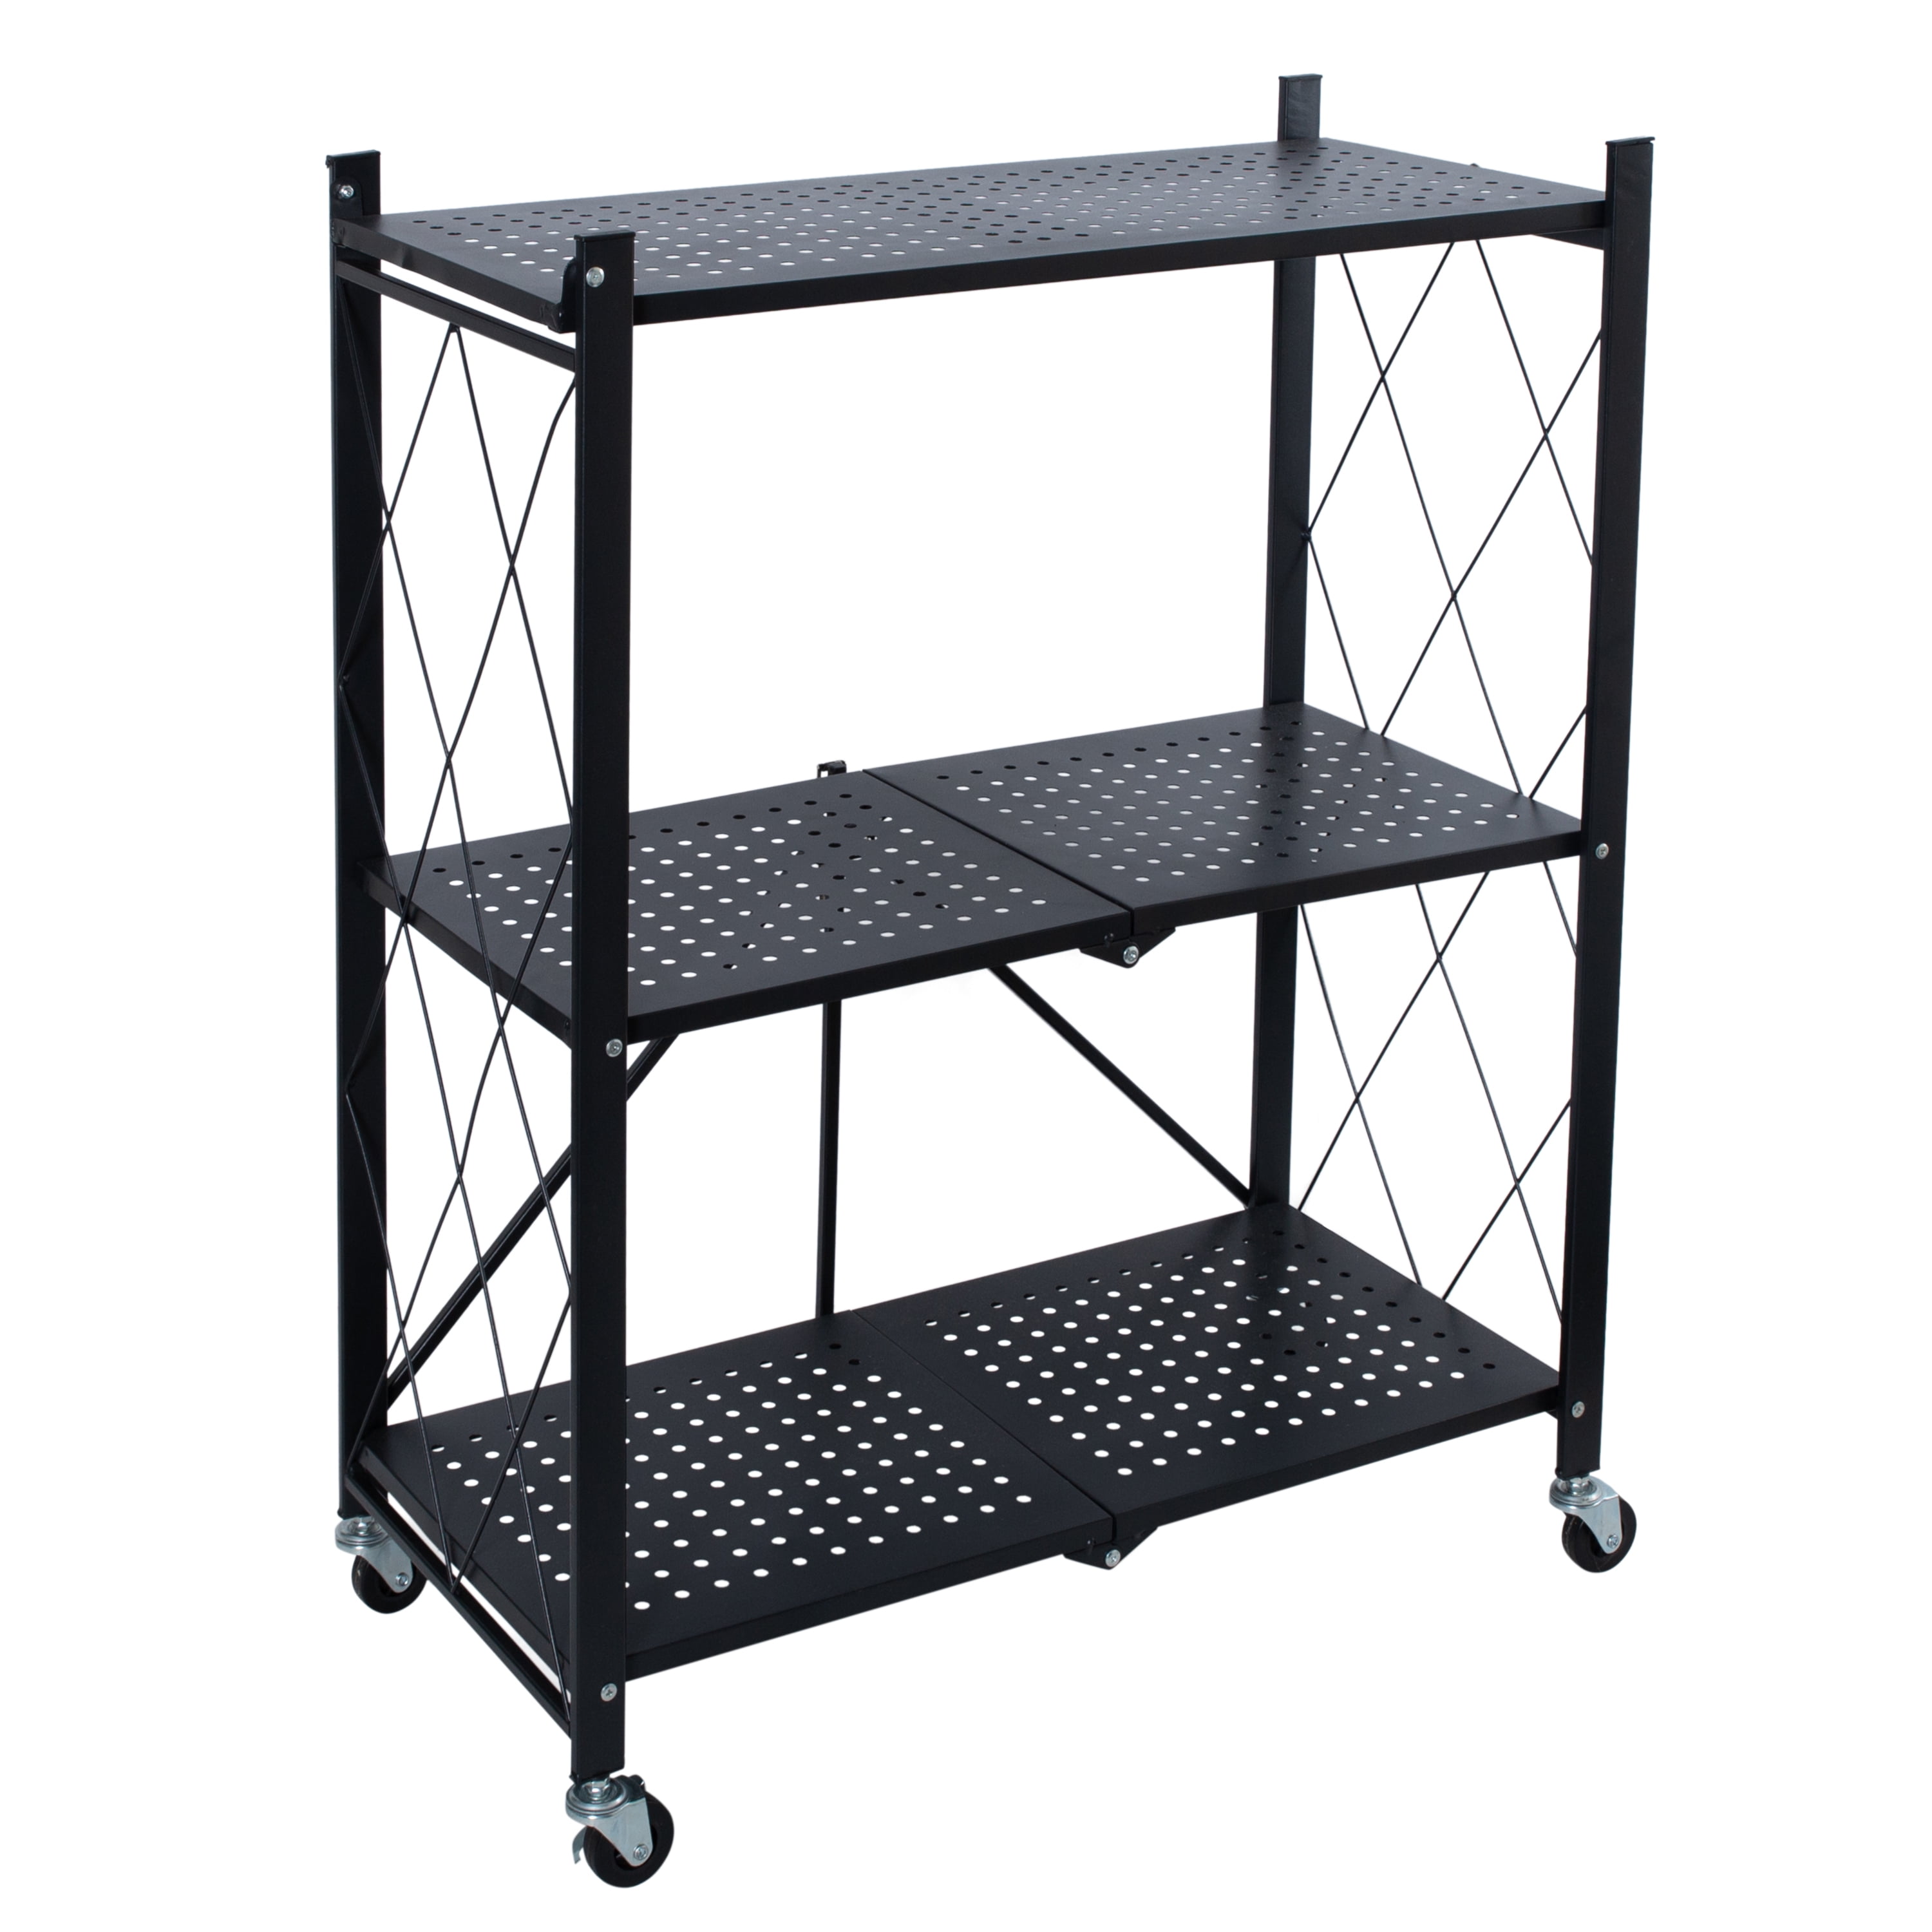 Organize It All Foldable Metal Rack with Wheels in Black - 3 Tier